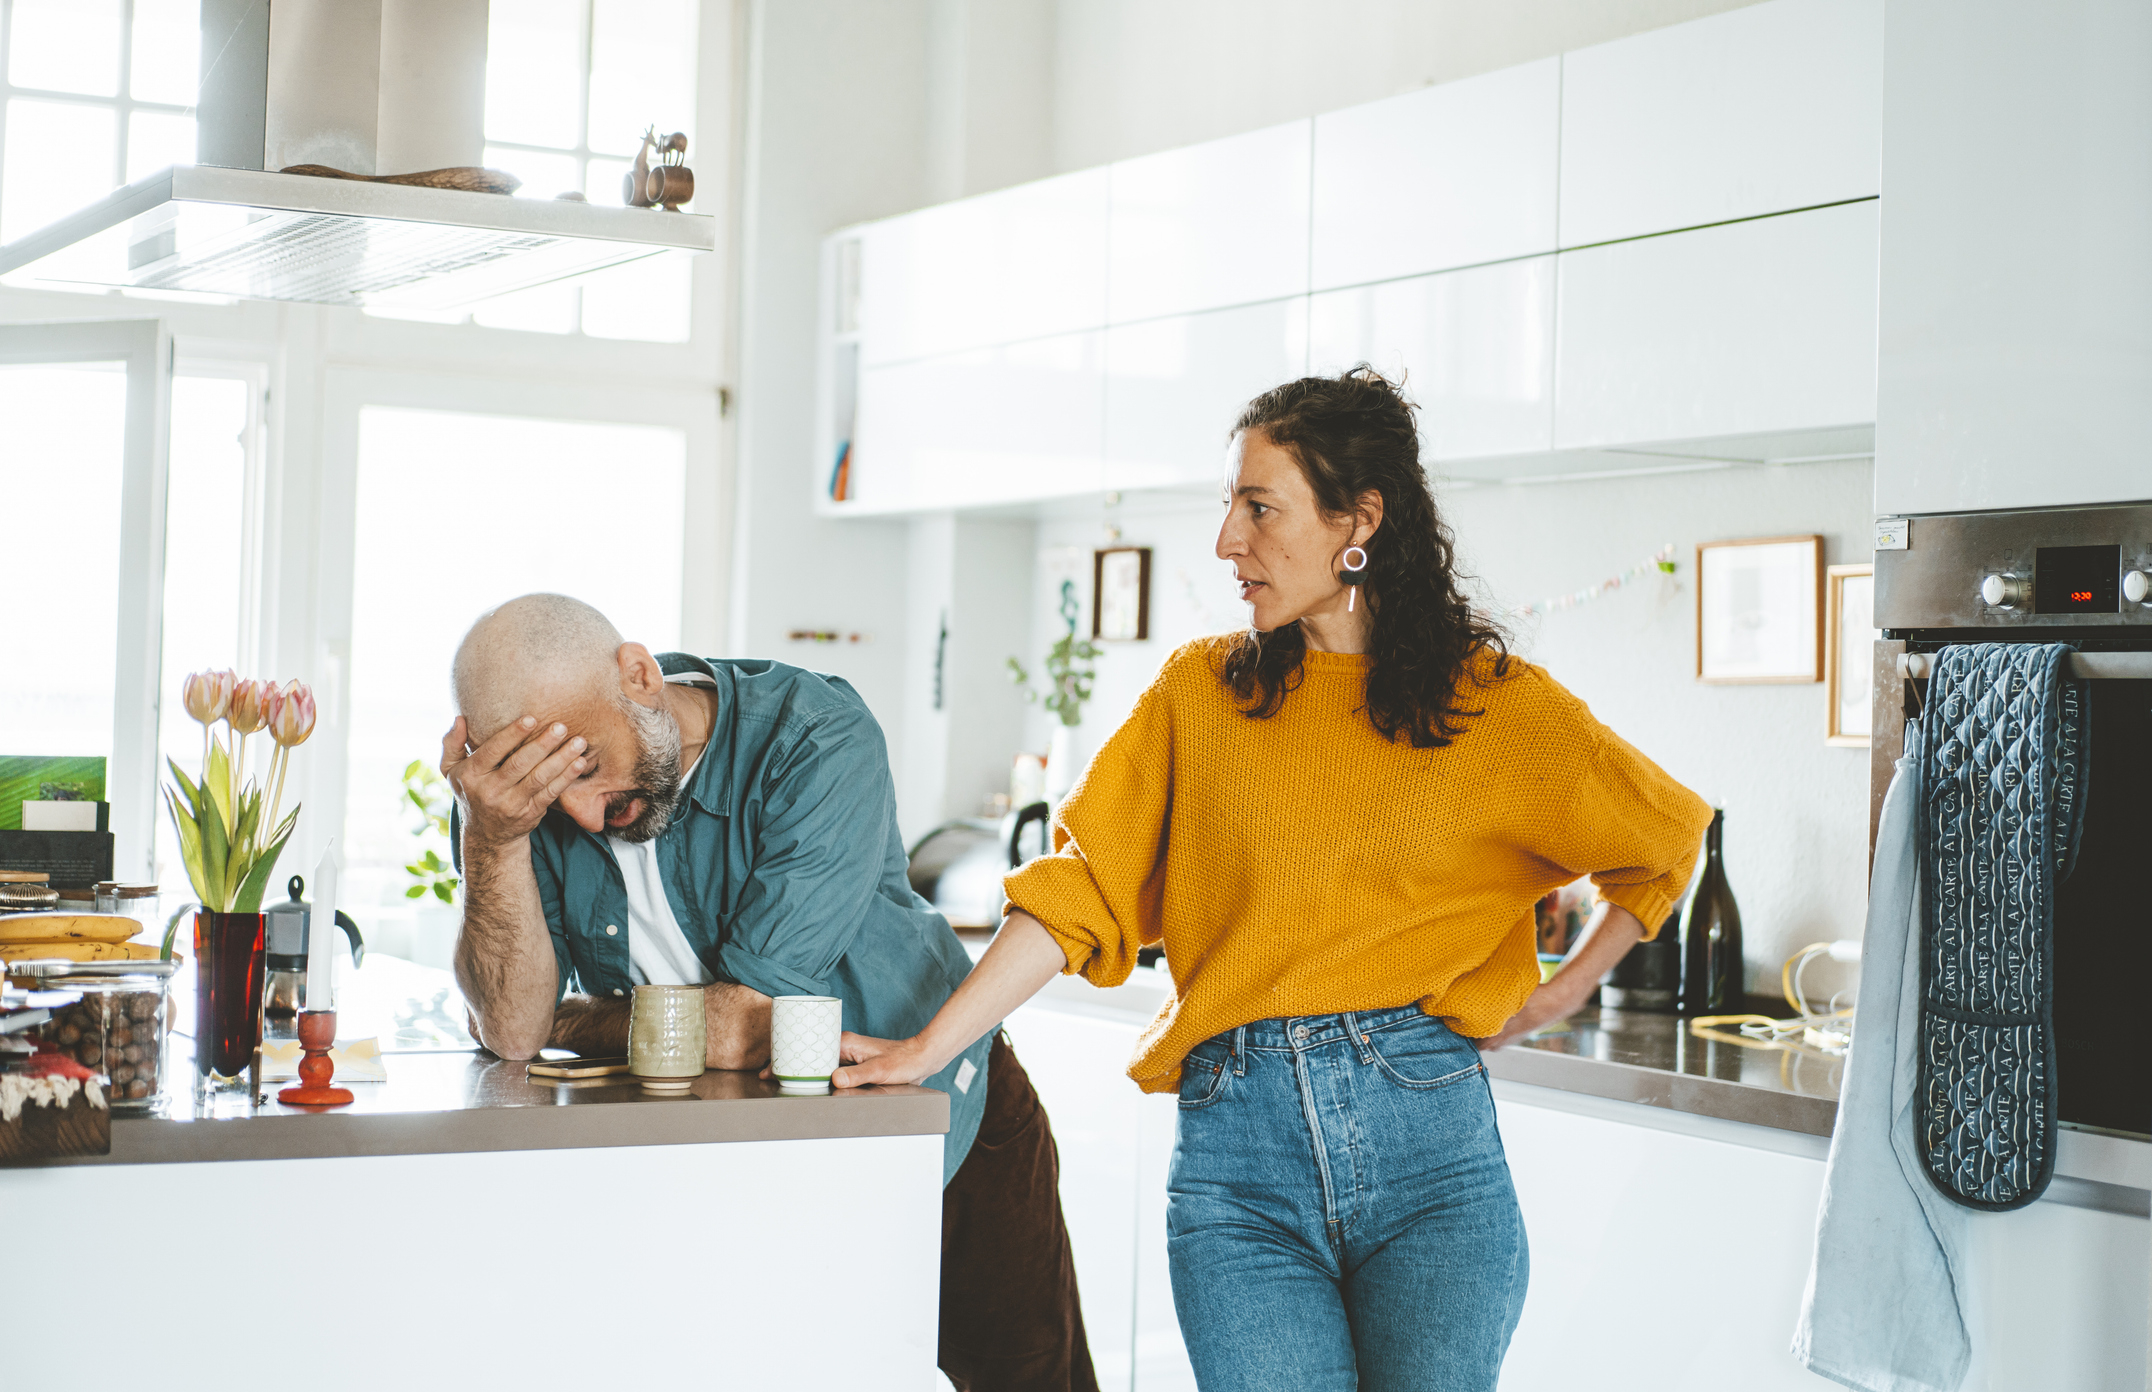 Two people in a kitchen, one appears frustrated with hand on head and the other is standing with hands on hips